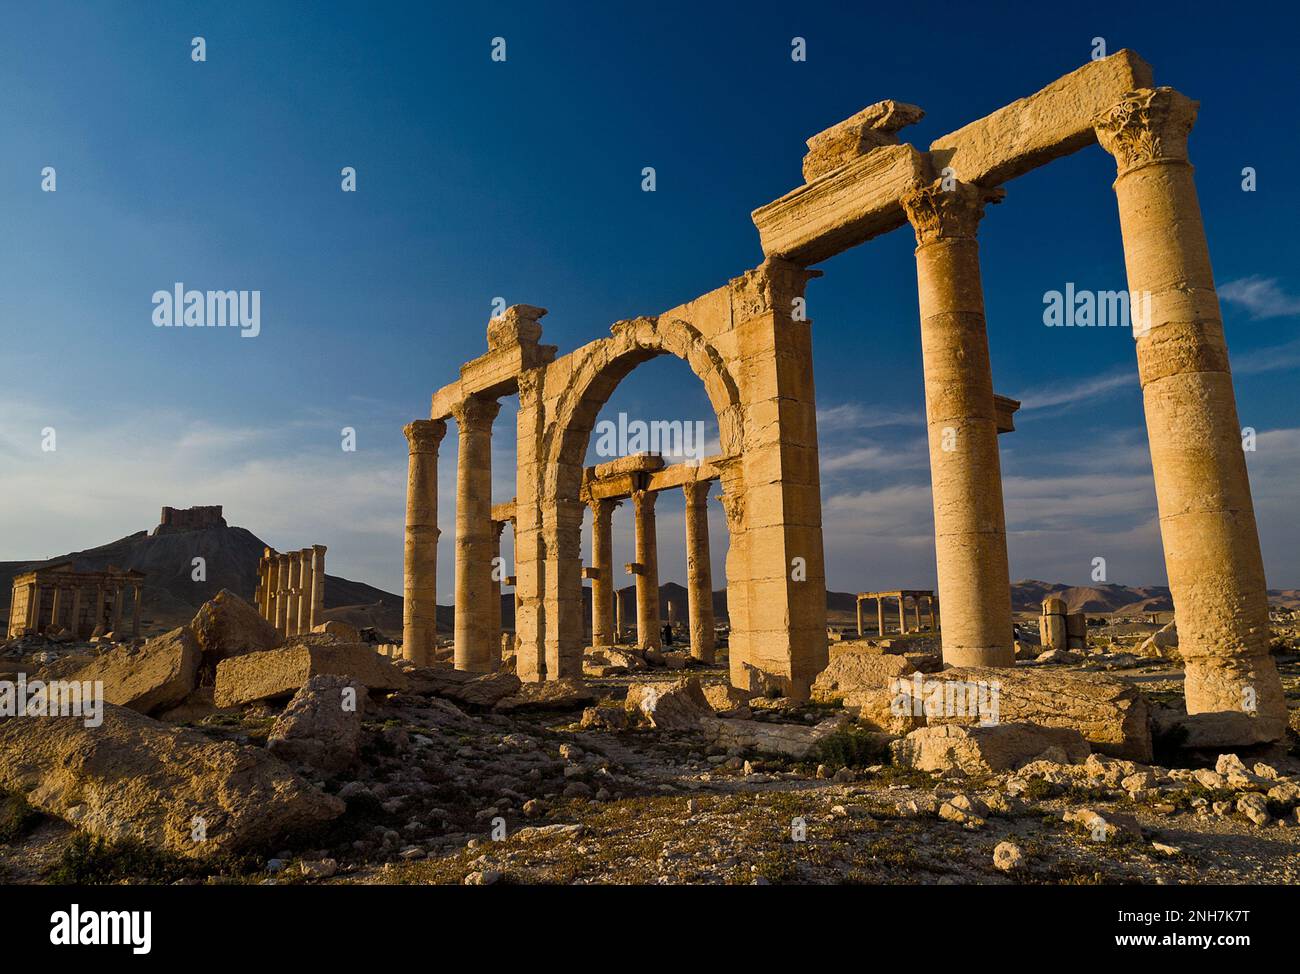 Ancient columns and stone arches at Palmyra ancient city ruins, Homs Governorate, Syria Stock Photo